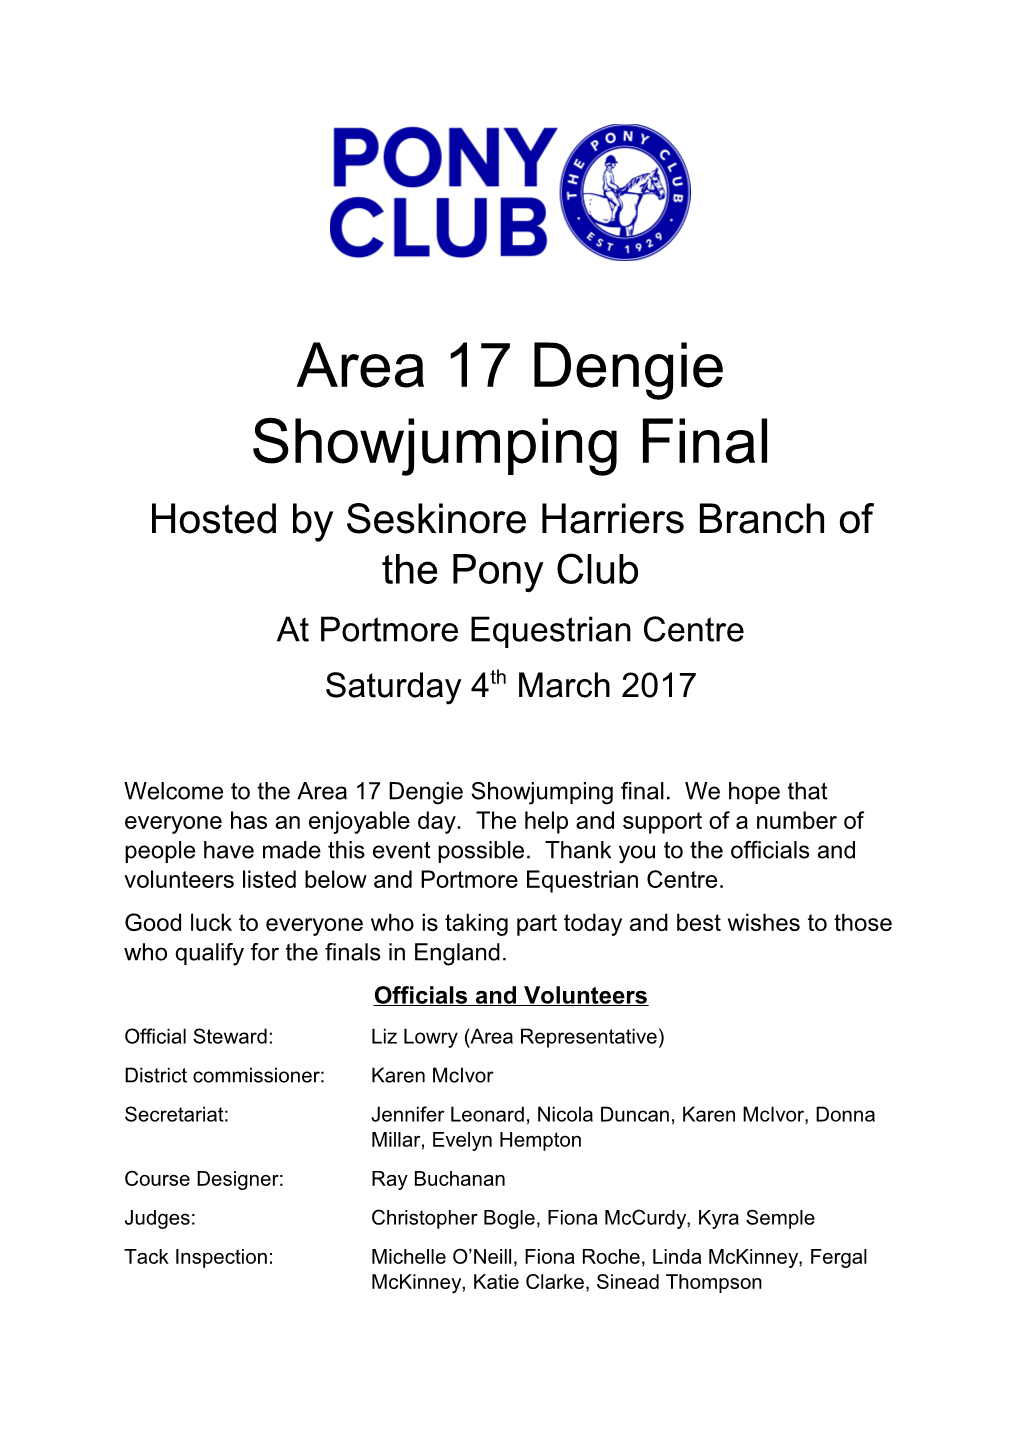 Hosted by Seskinore Harriers Branch of the Pony Club